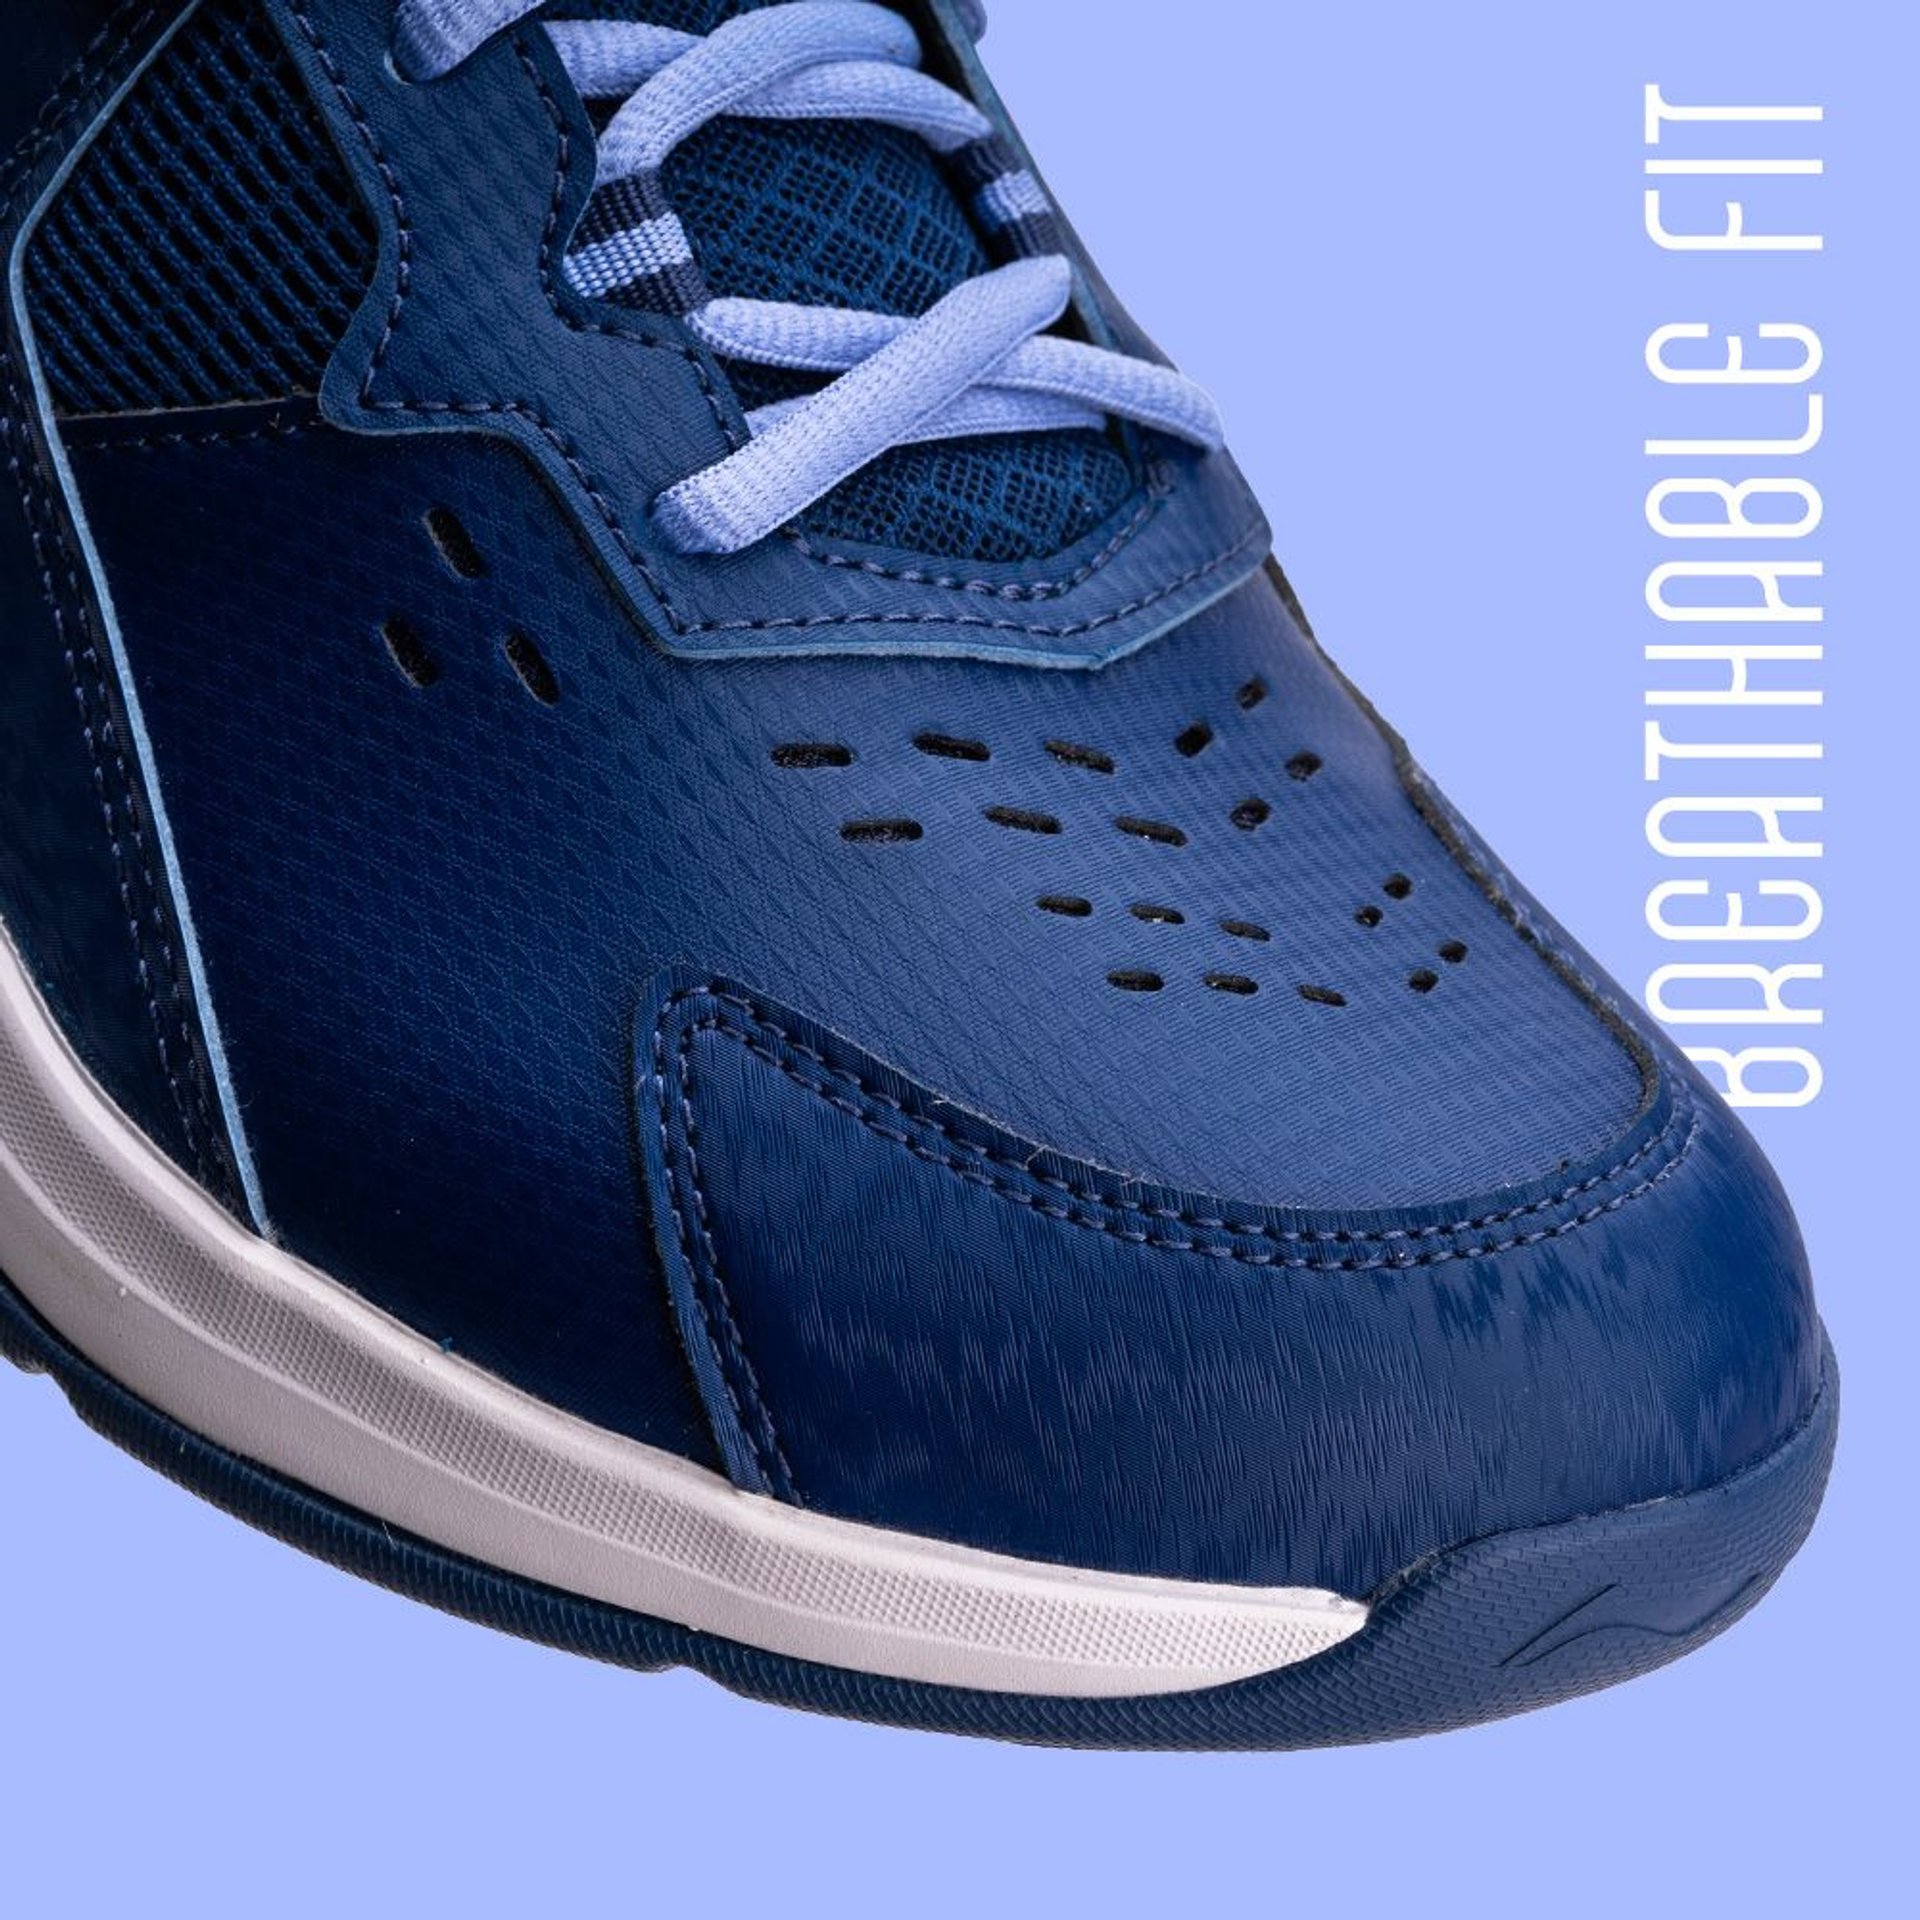 Almighty V - Badminton Shoe - Breathable Fit